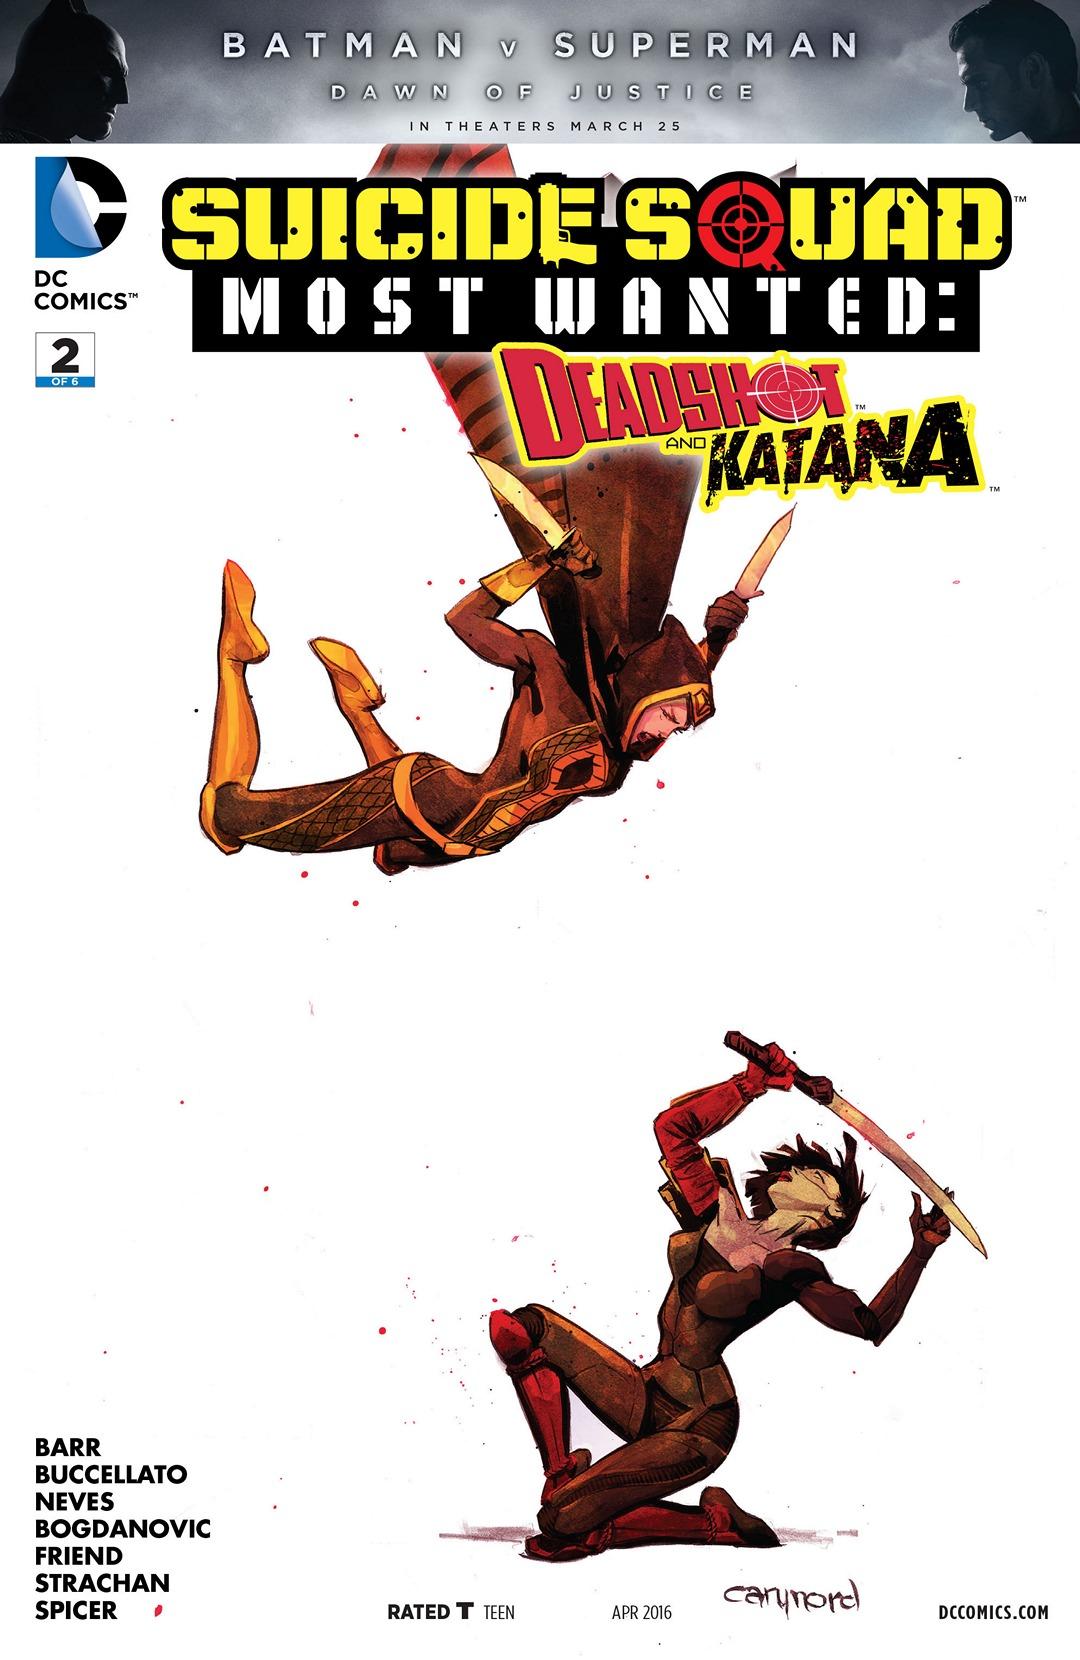 Suicide Squad Most Wanted: Deadshot and Katana Vol. 1 #2